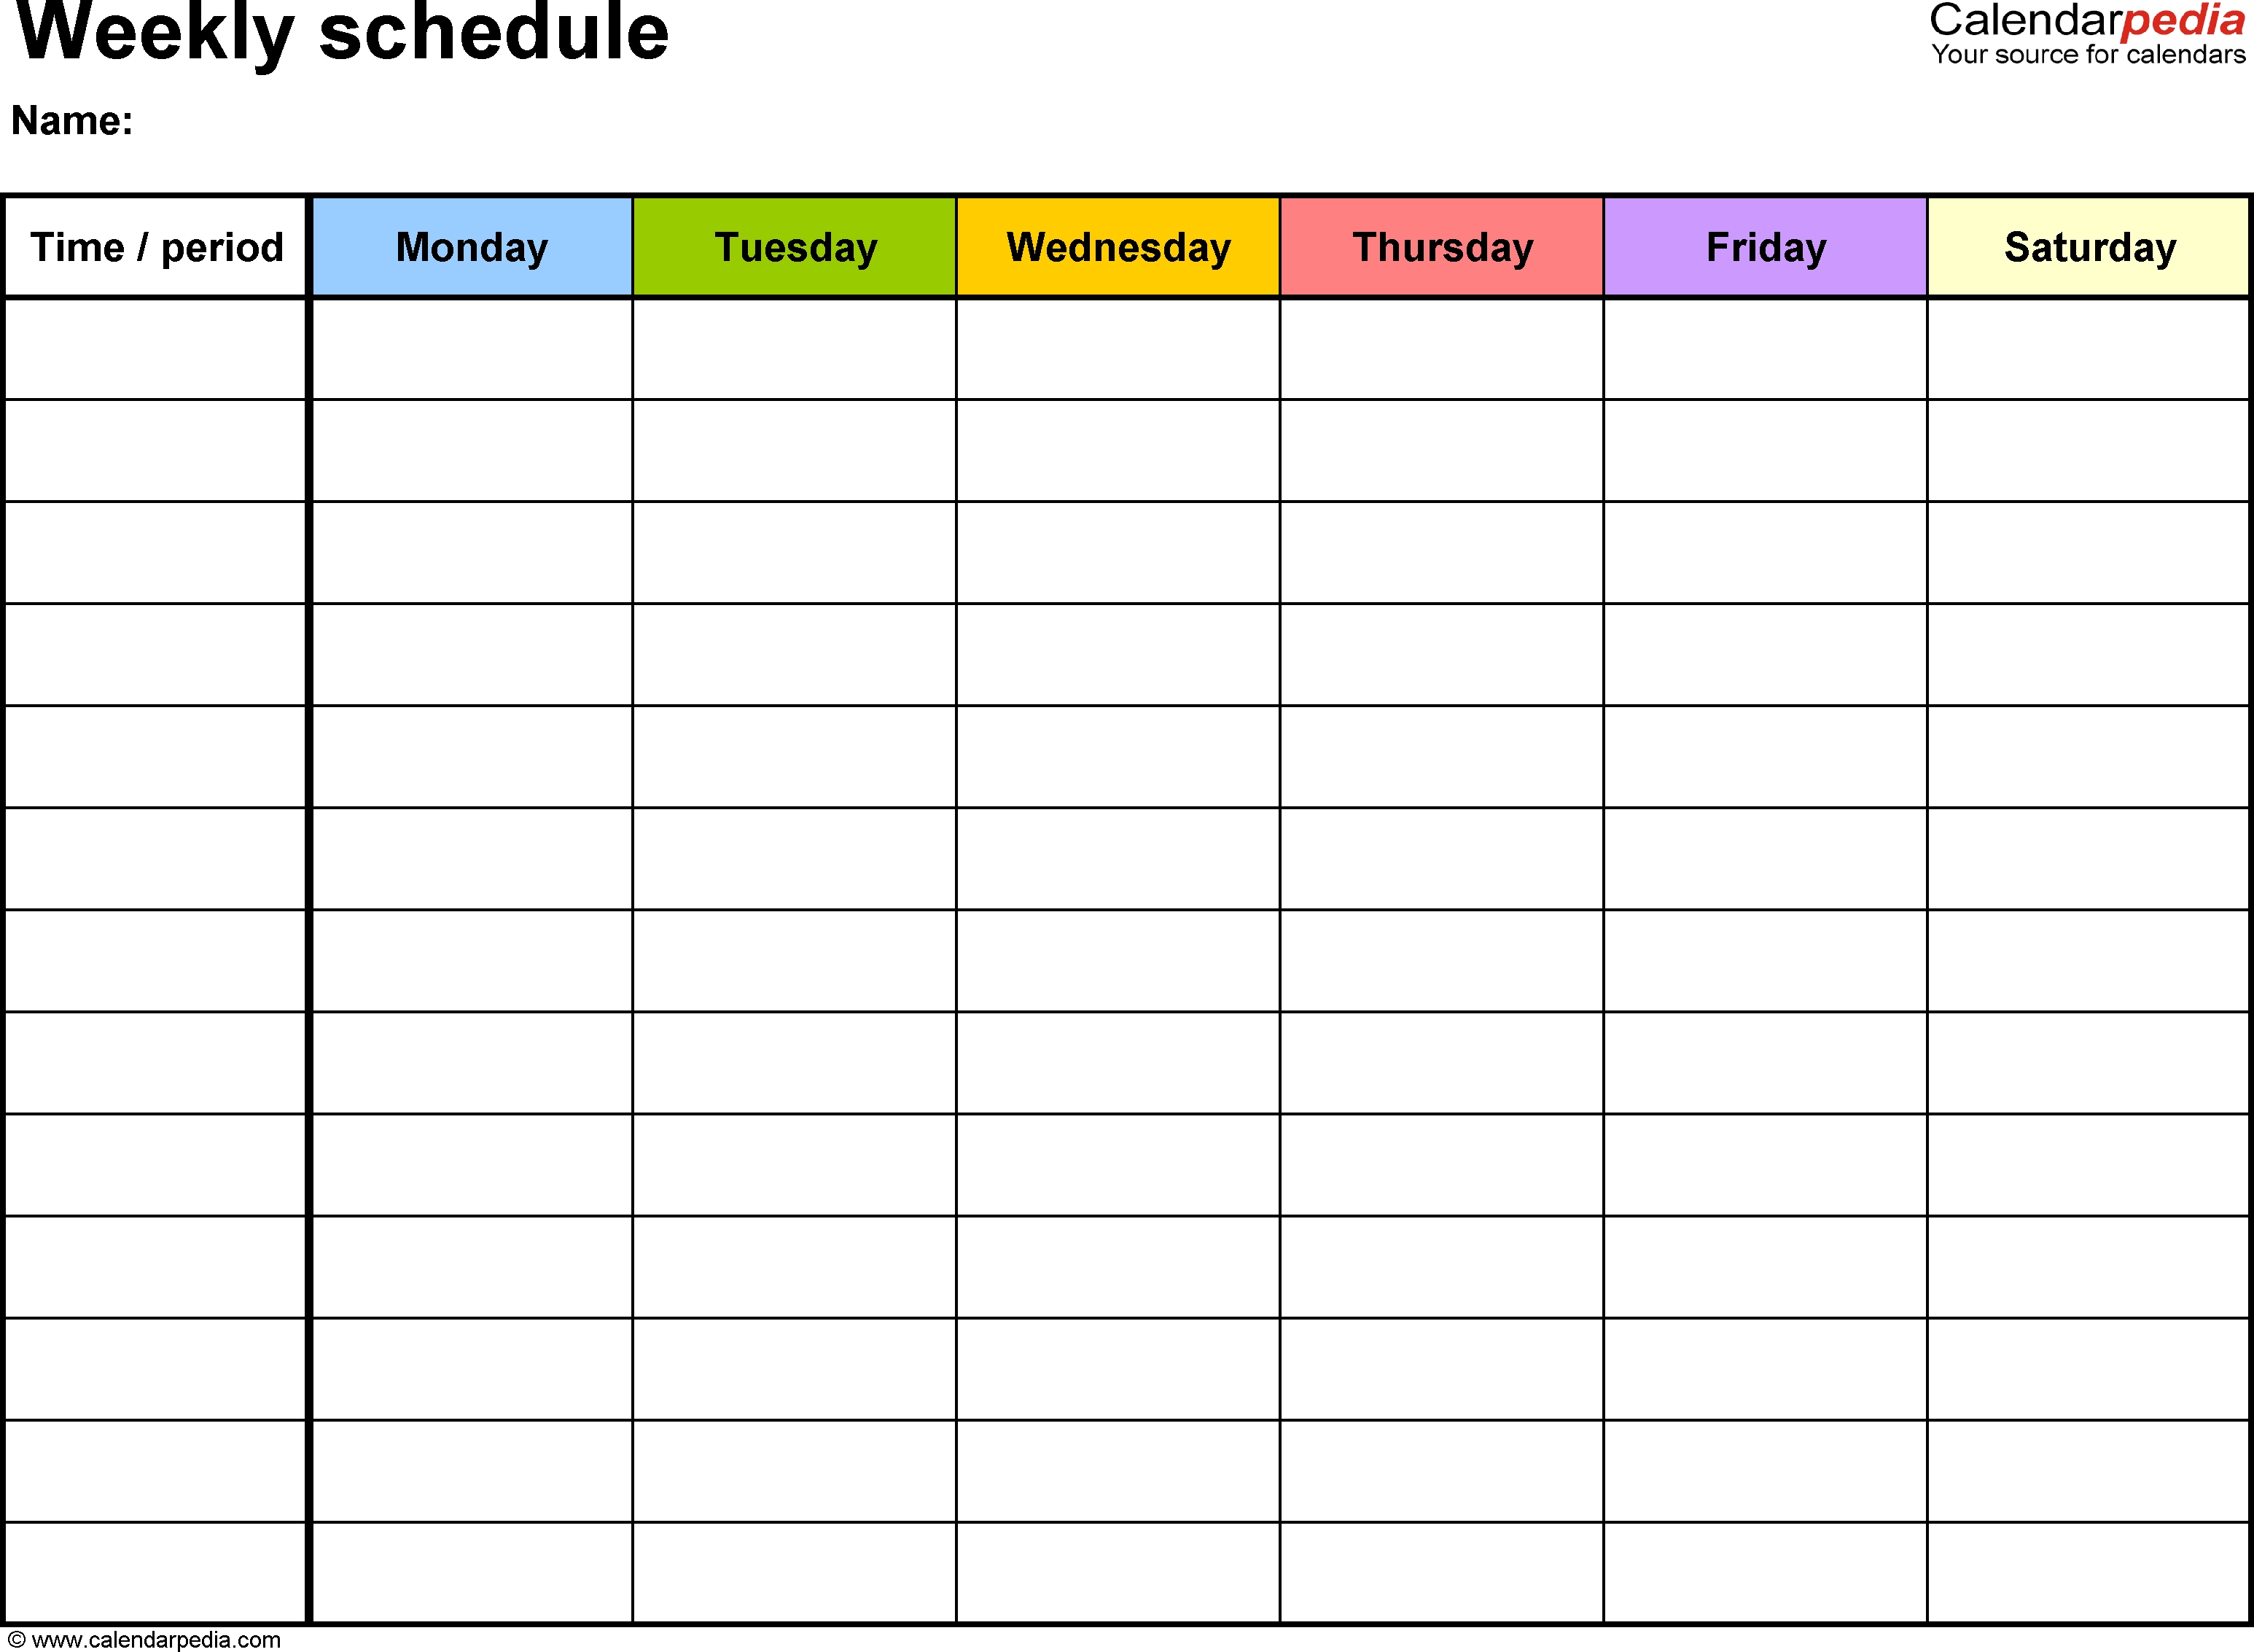 Free Weekly Schedule Templates For Word - 18 Templates-Monday - Friday Printable Blank Calendar